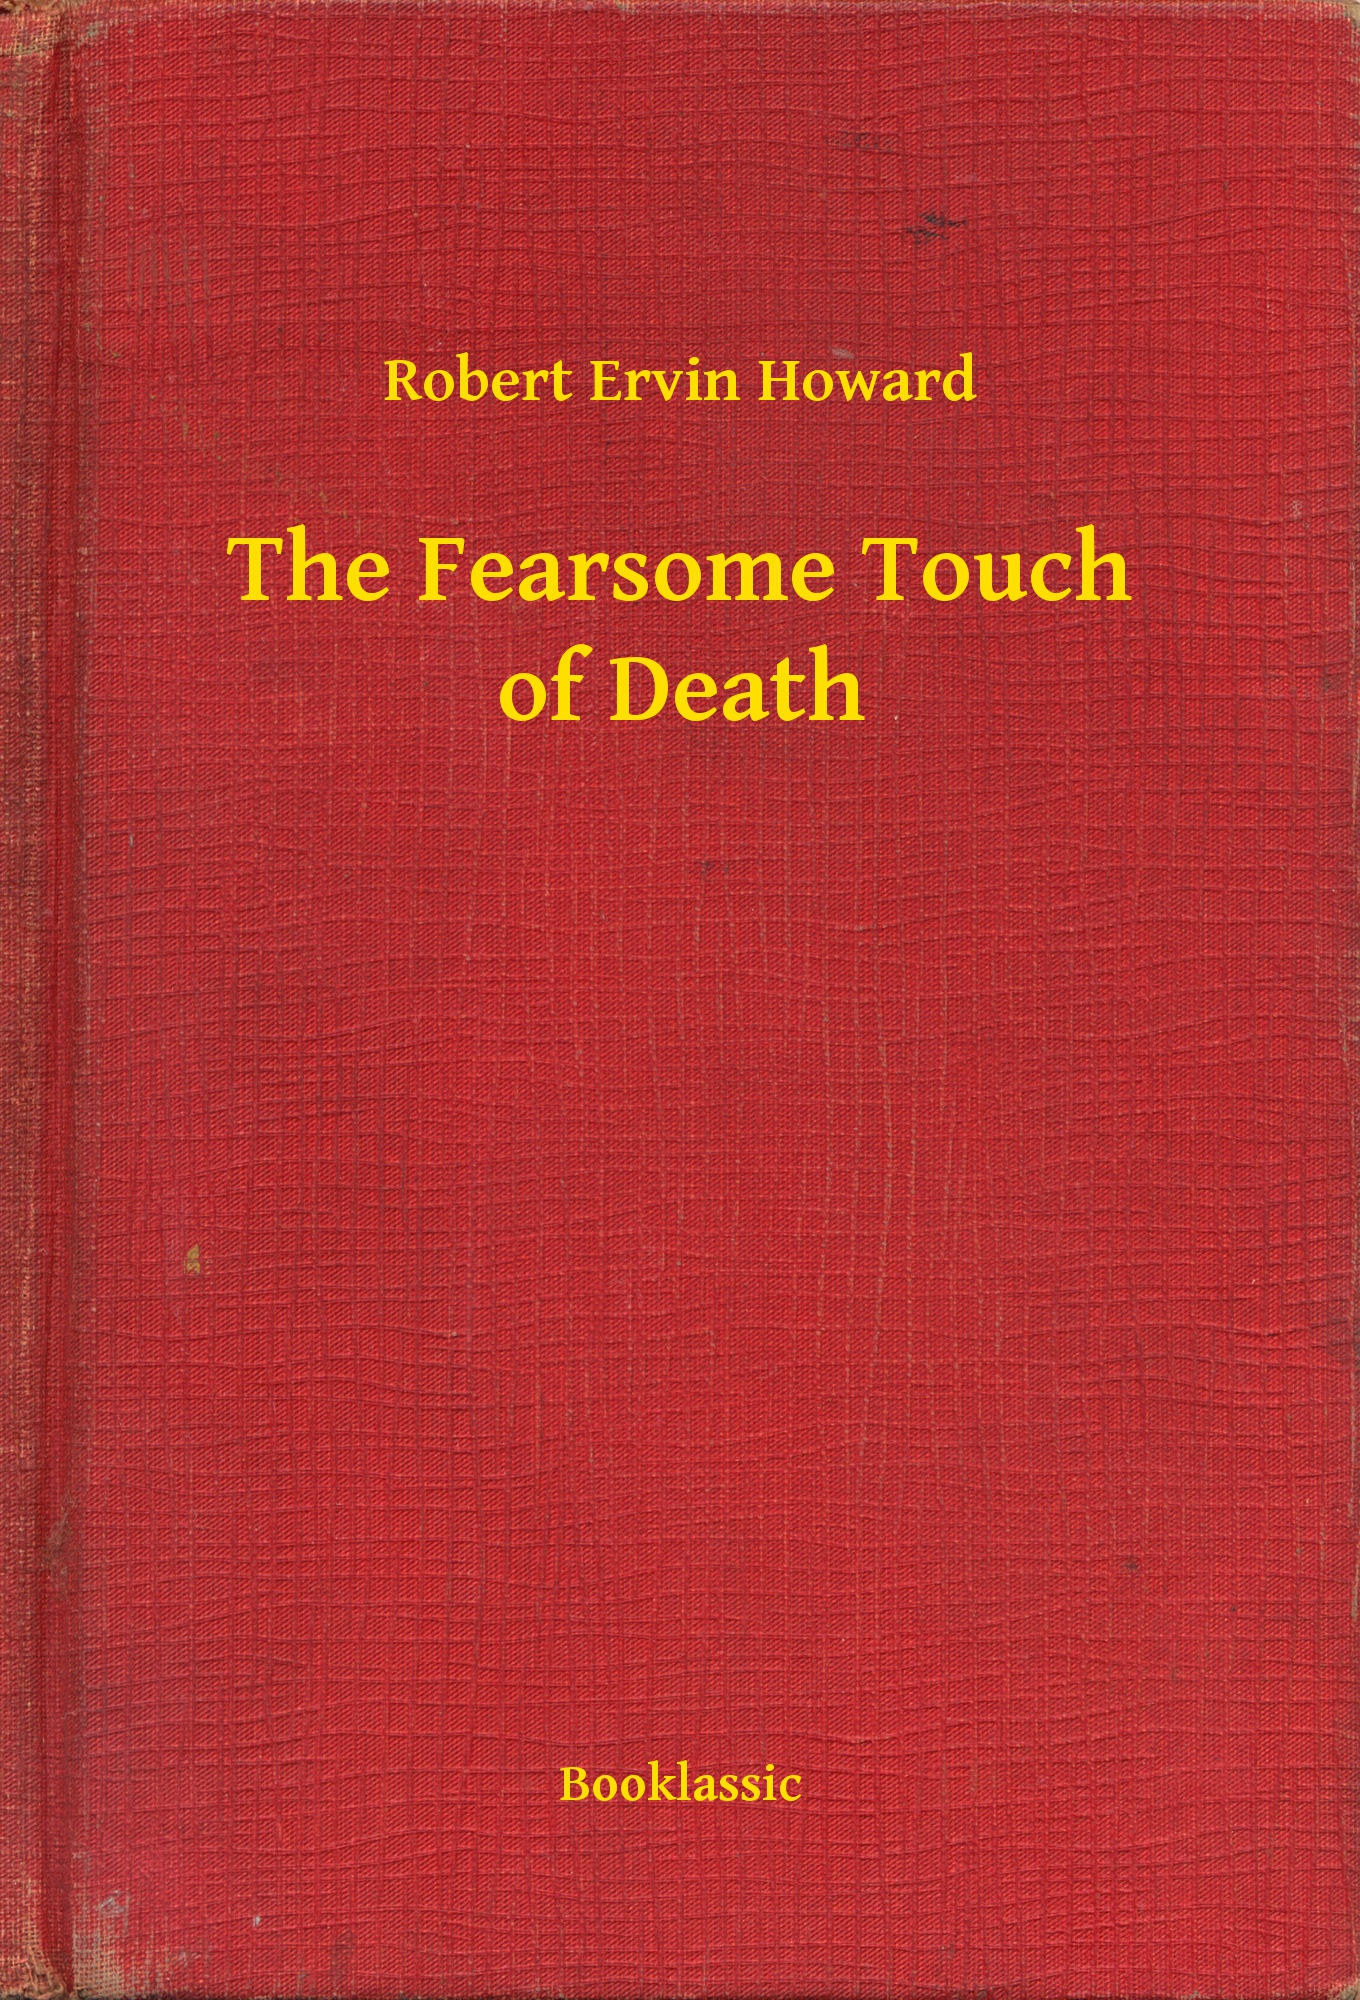 The Fearsome Touch of Death